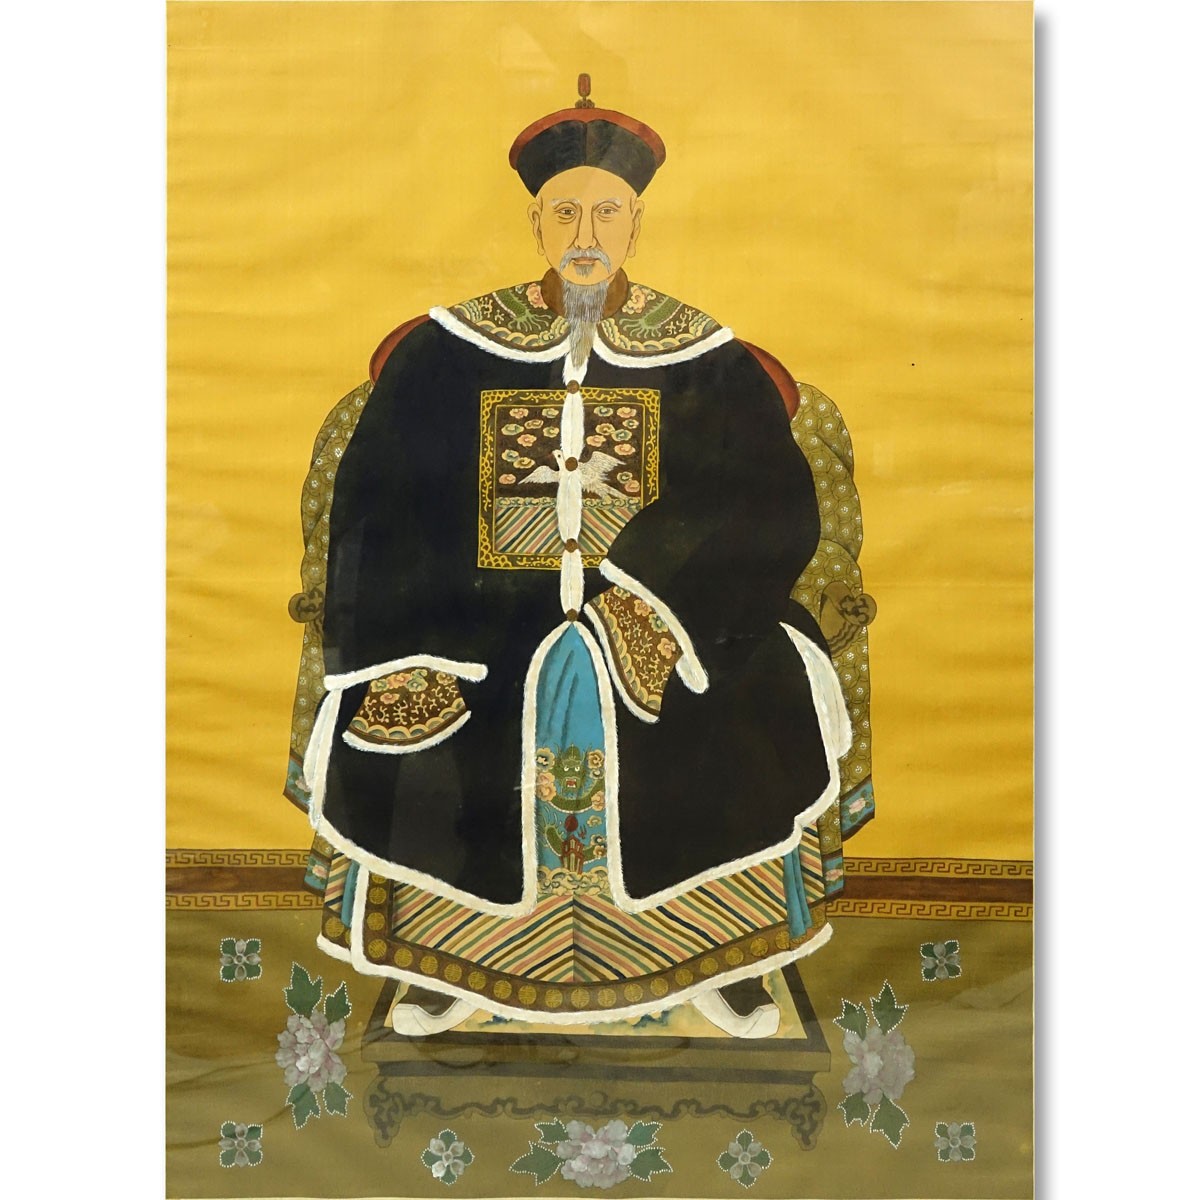 Large Antique Chinese Qing Dynasty Style Watercolor on Silk Scroll Painting, Seated Emperor. Water stains to border otherwise good condition.